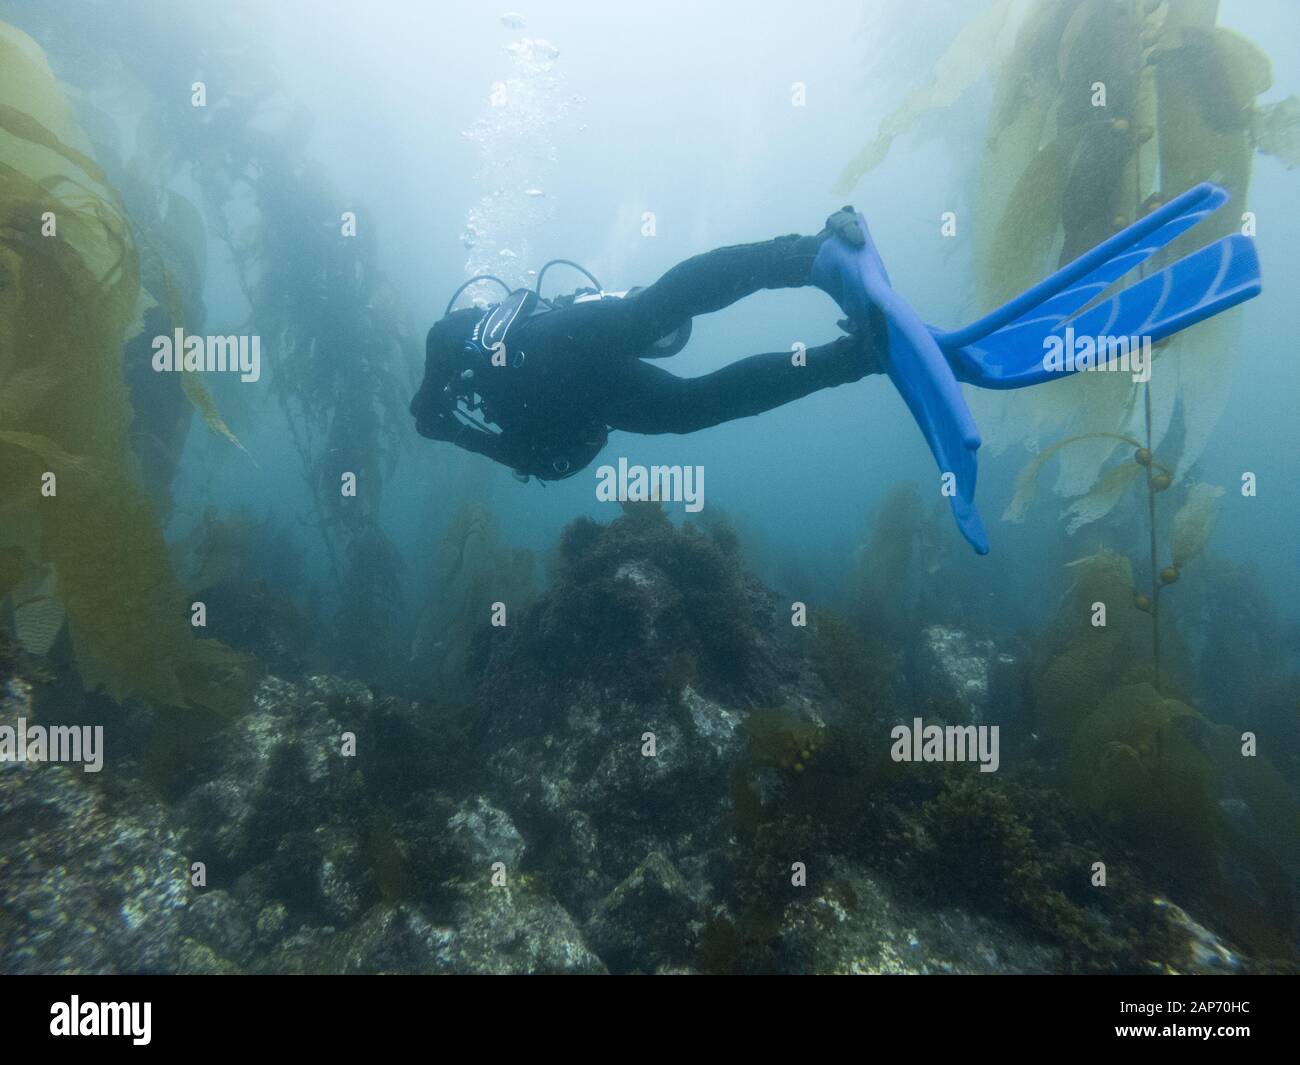 Underwater picture of scuba diver from the side in the kelp forest in the CHANNEL ISLANDS, California, USA Stock Photo